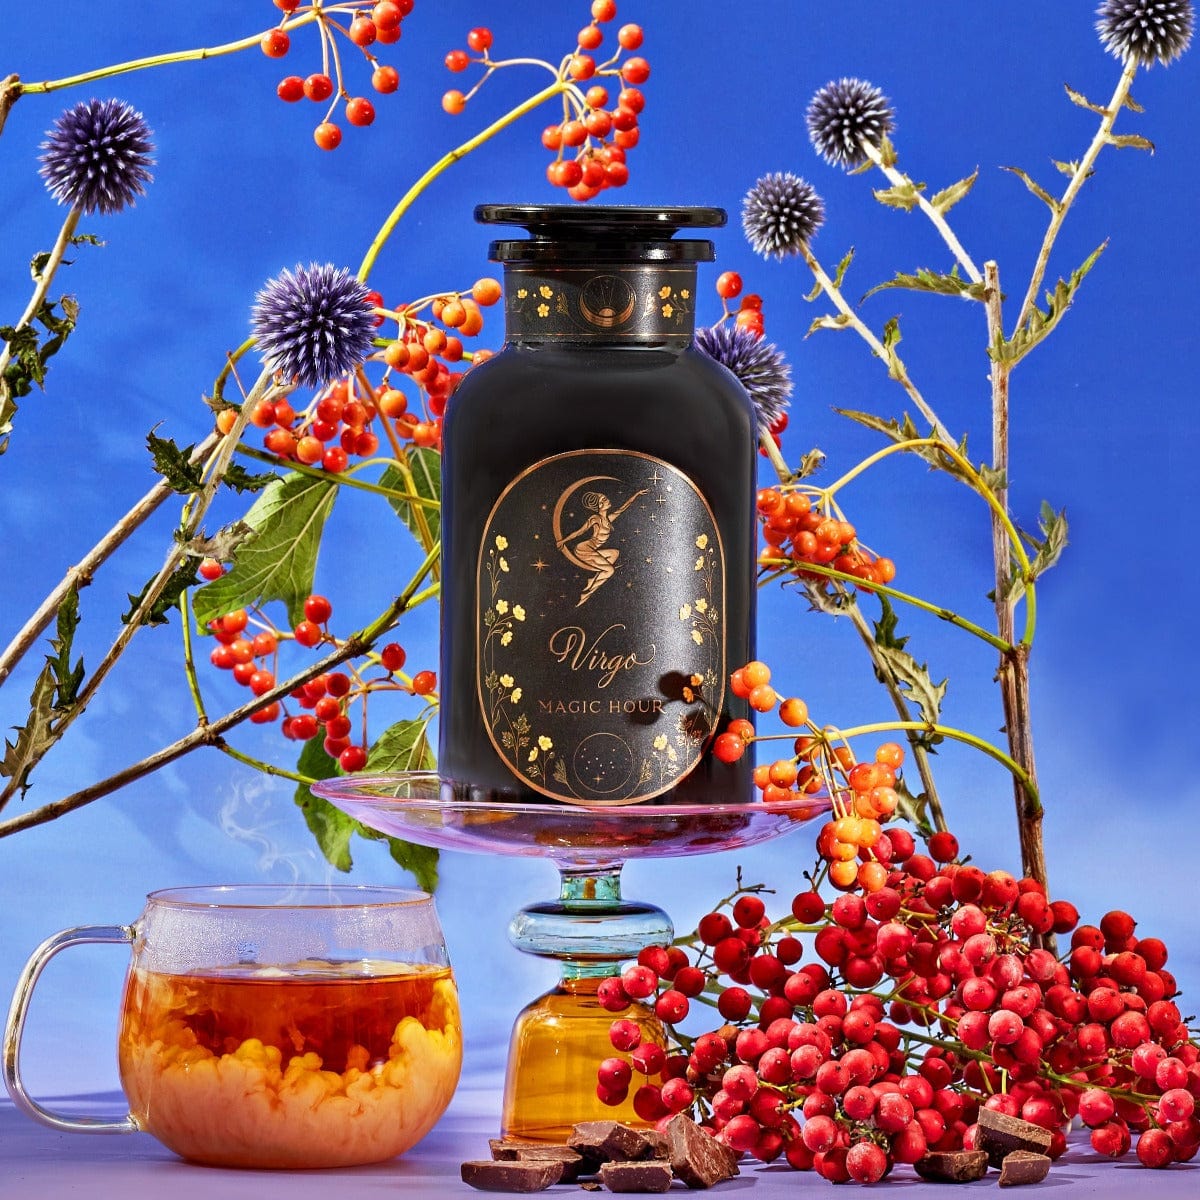 A black jar labeled "Magic Hour Virgo Tea of Virtue, Wit & Meticulous Magic" sits on a glass stand among vibrant orange berries, purple thistle flowers, and leafy branches under a blue sky. Beside it, a clear glass mug of Organic Tea with loose leaf tea and a cluster of red berries complete the harmonious arrangement.